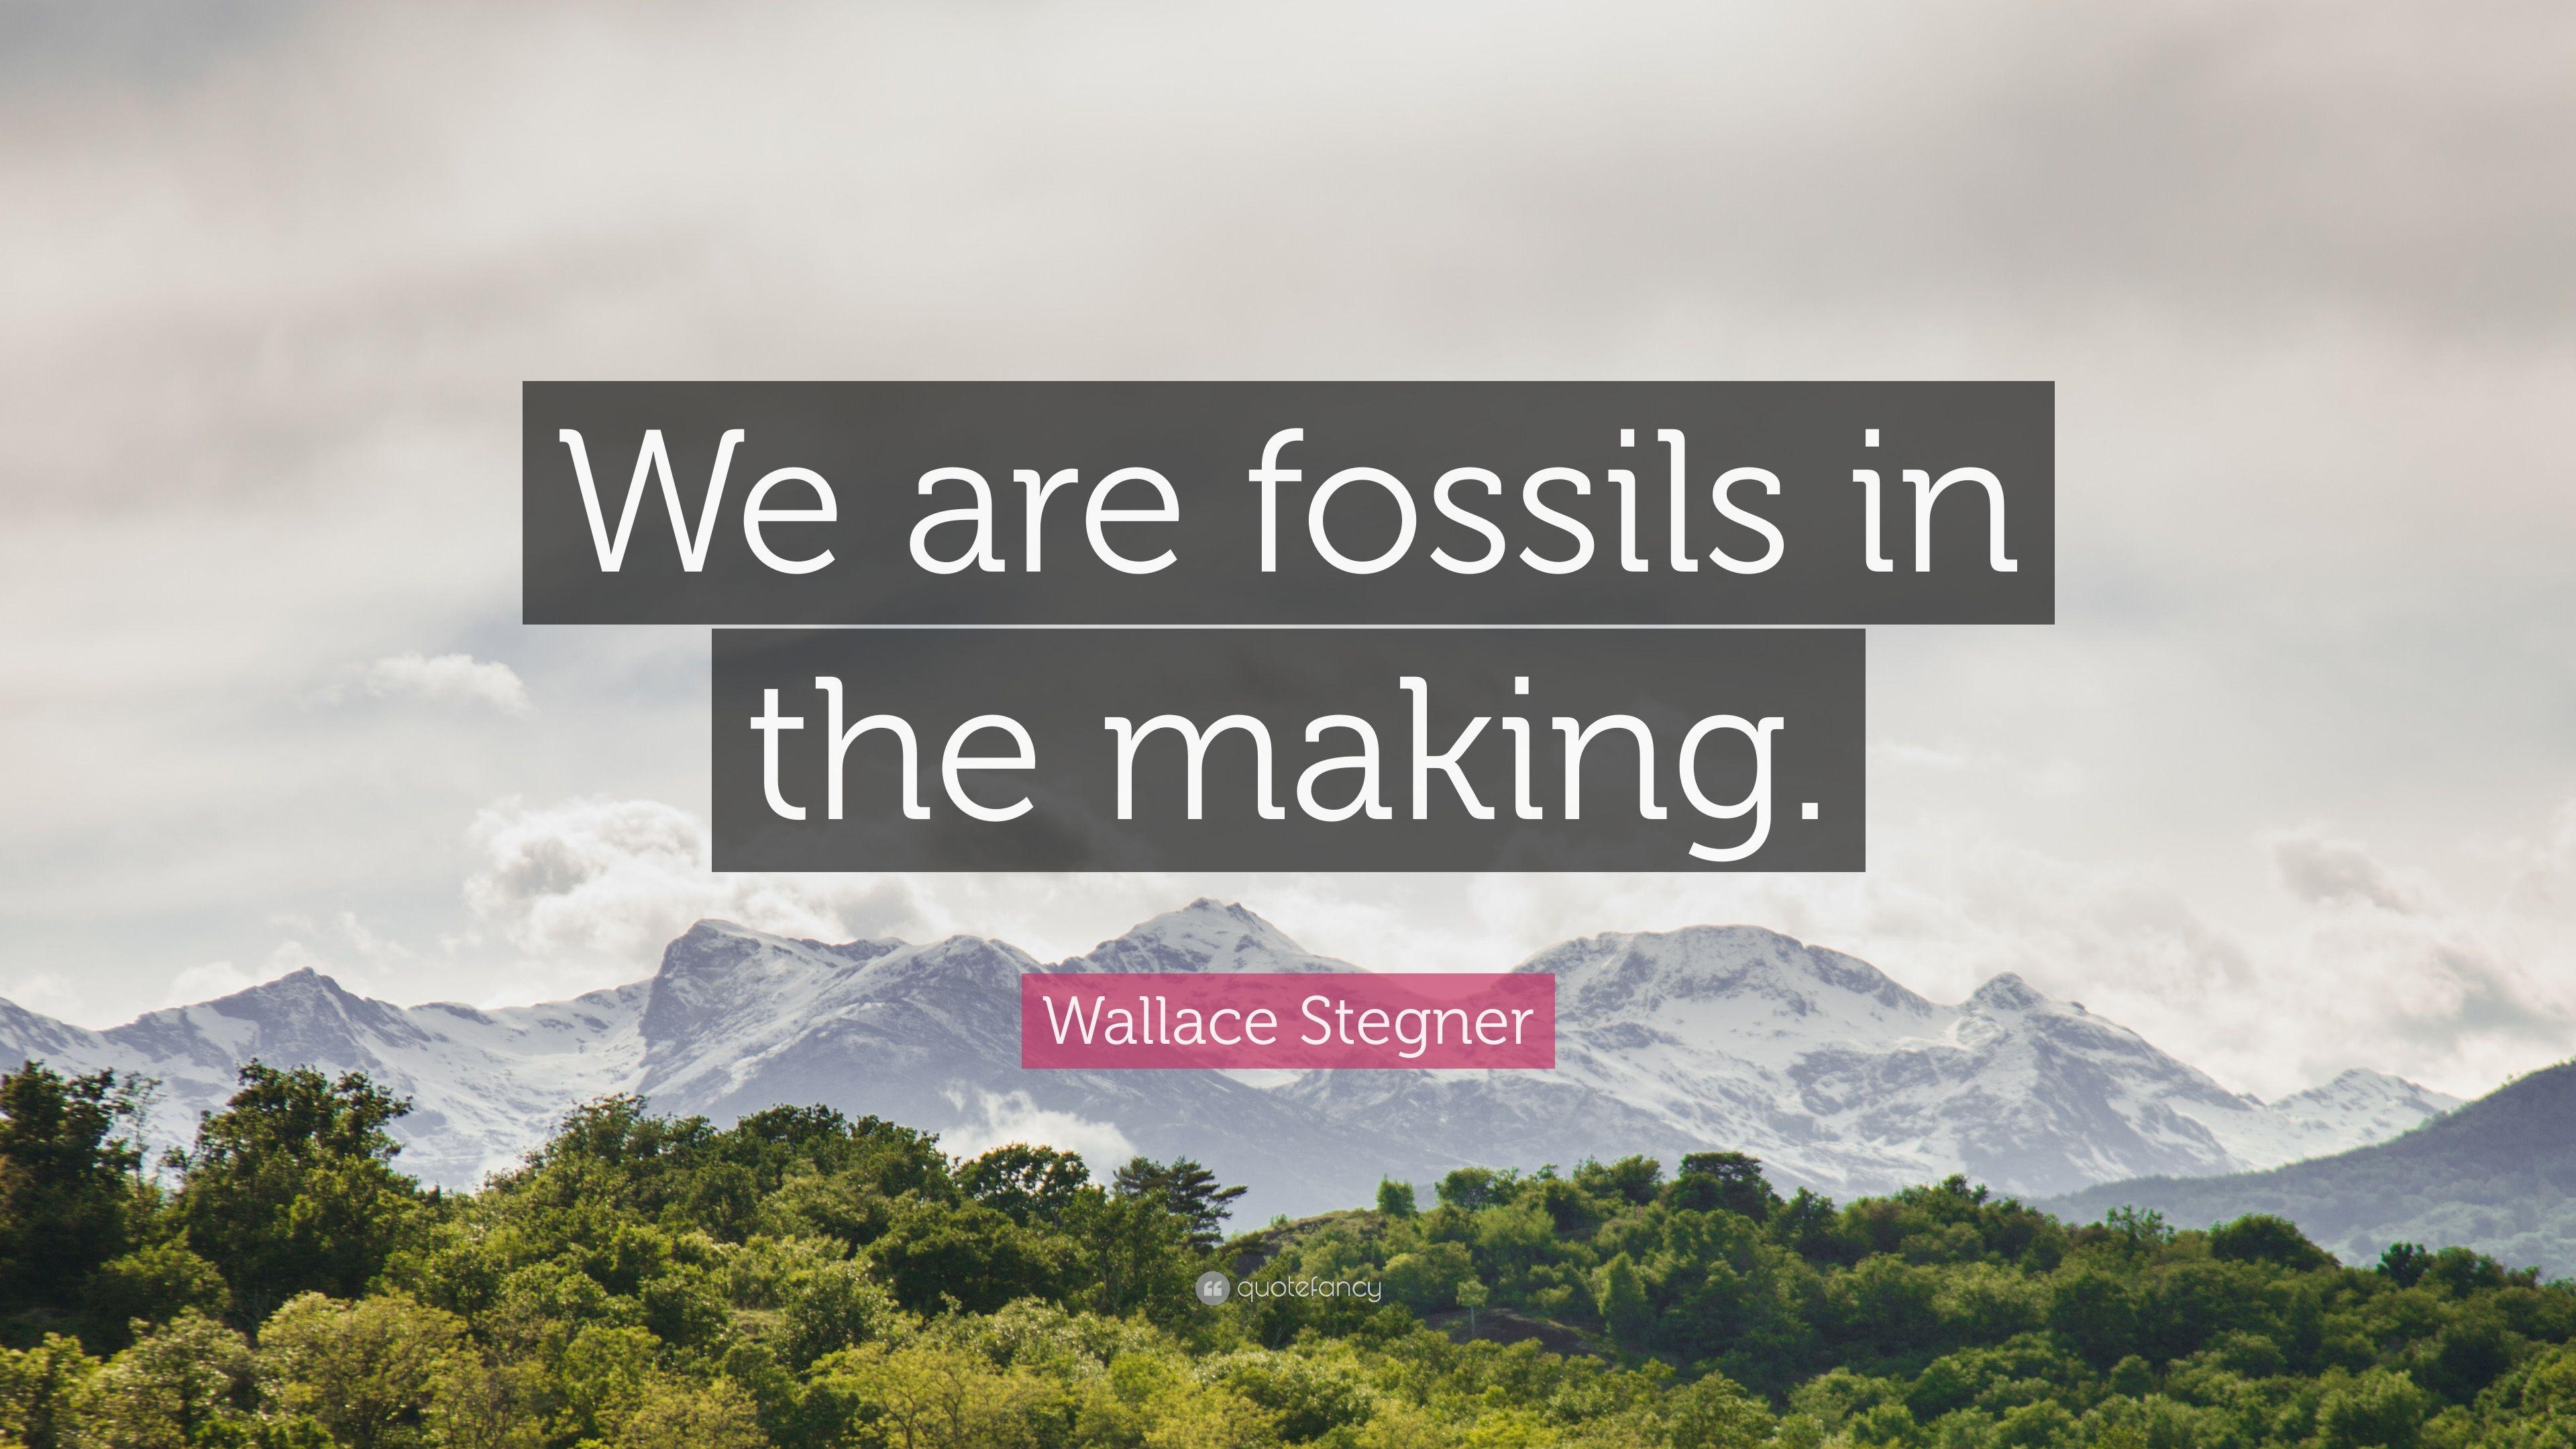 Wallace Stegner Quote: “We are fossils in the making.” 7 wallpaper